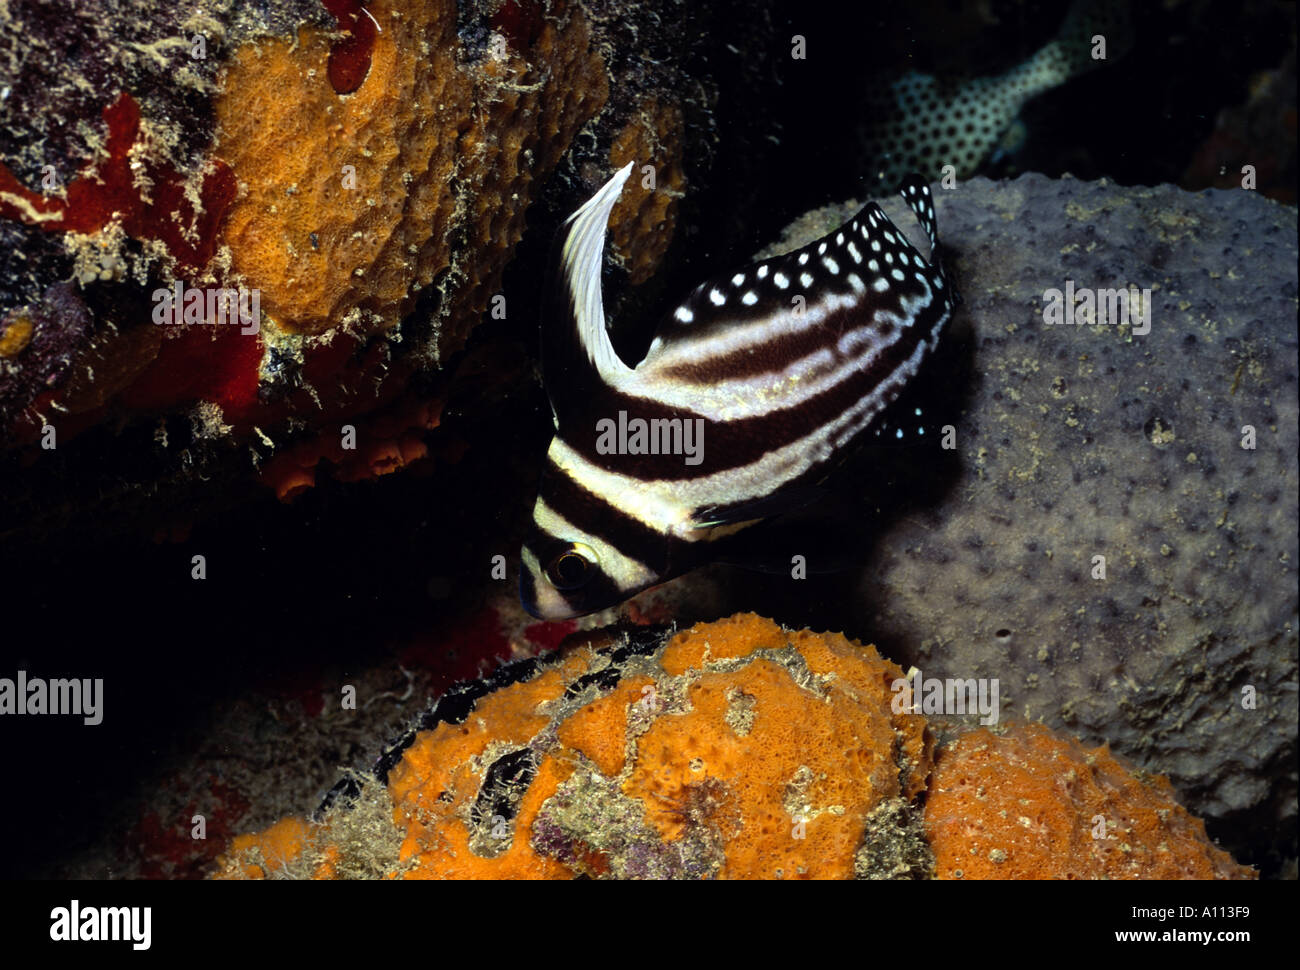 CLOSEUP OF A SPOTTED DRUM Equetus punctatus NEXT TO A VARIETY OF SPONGES IN BONAIRE Stock Photo